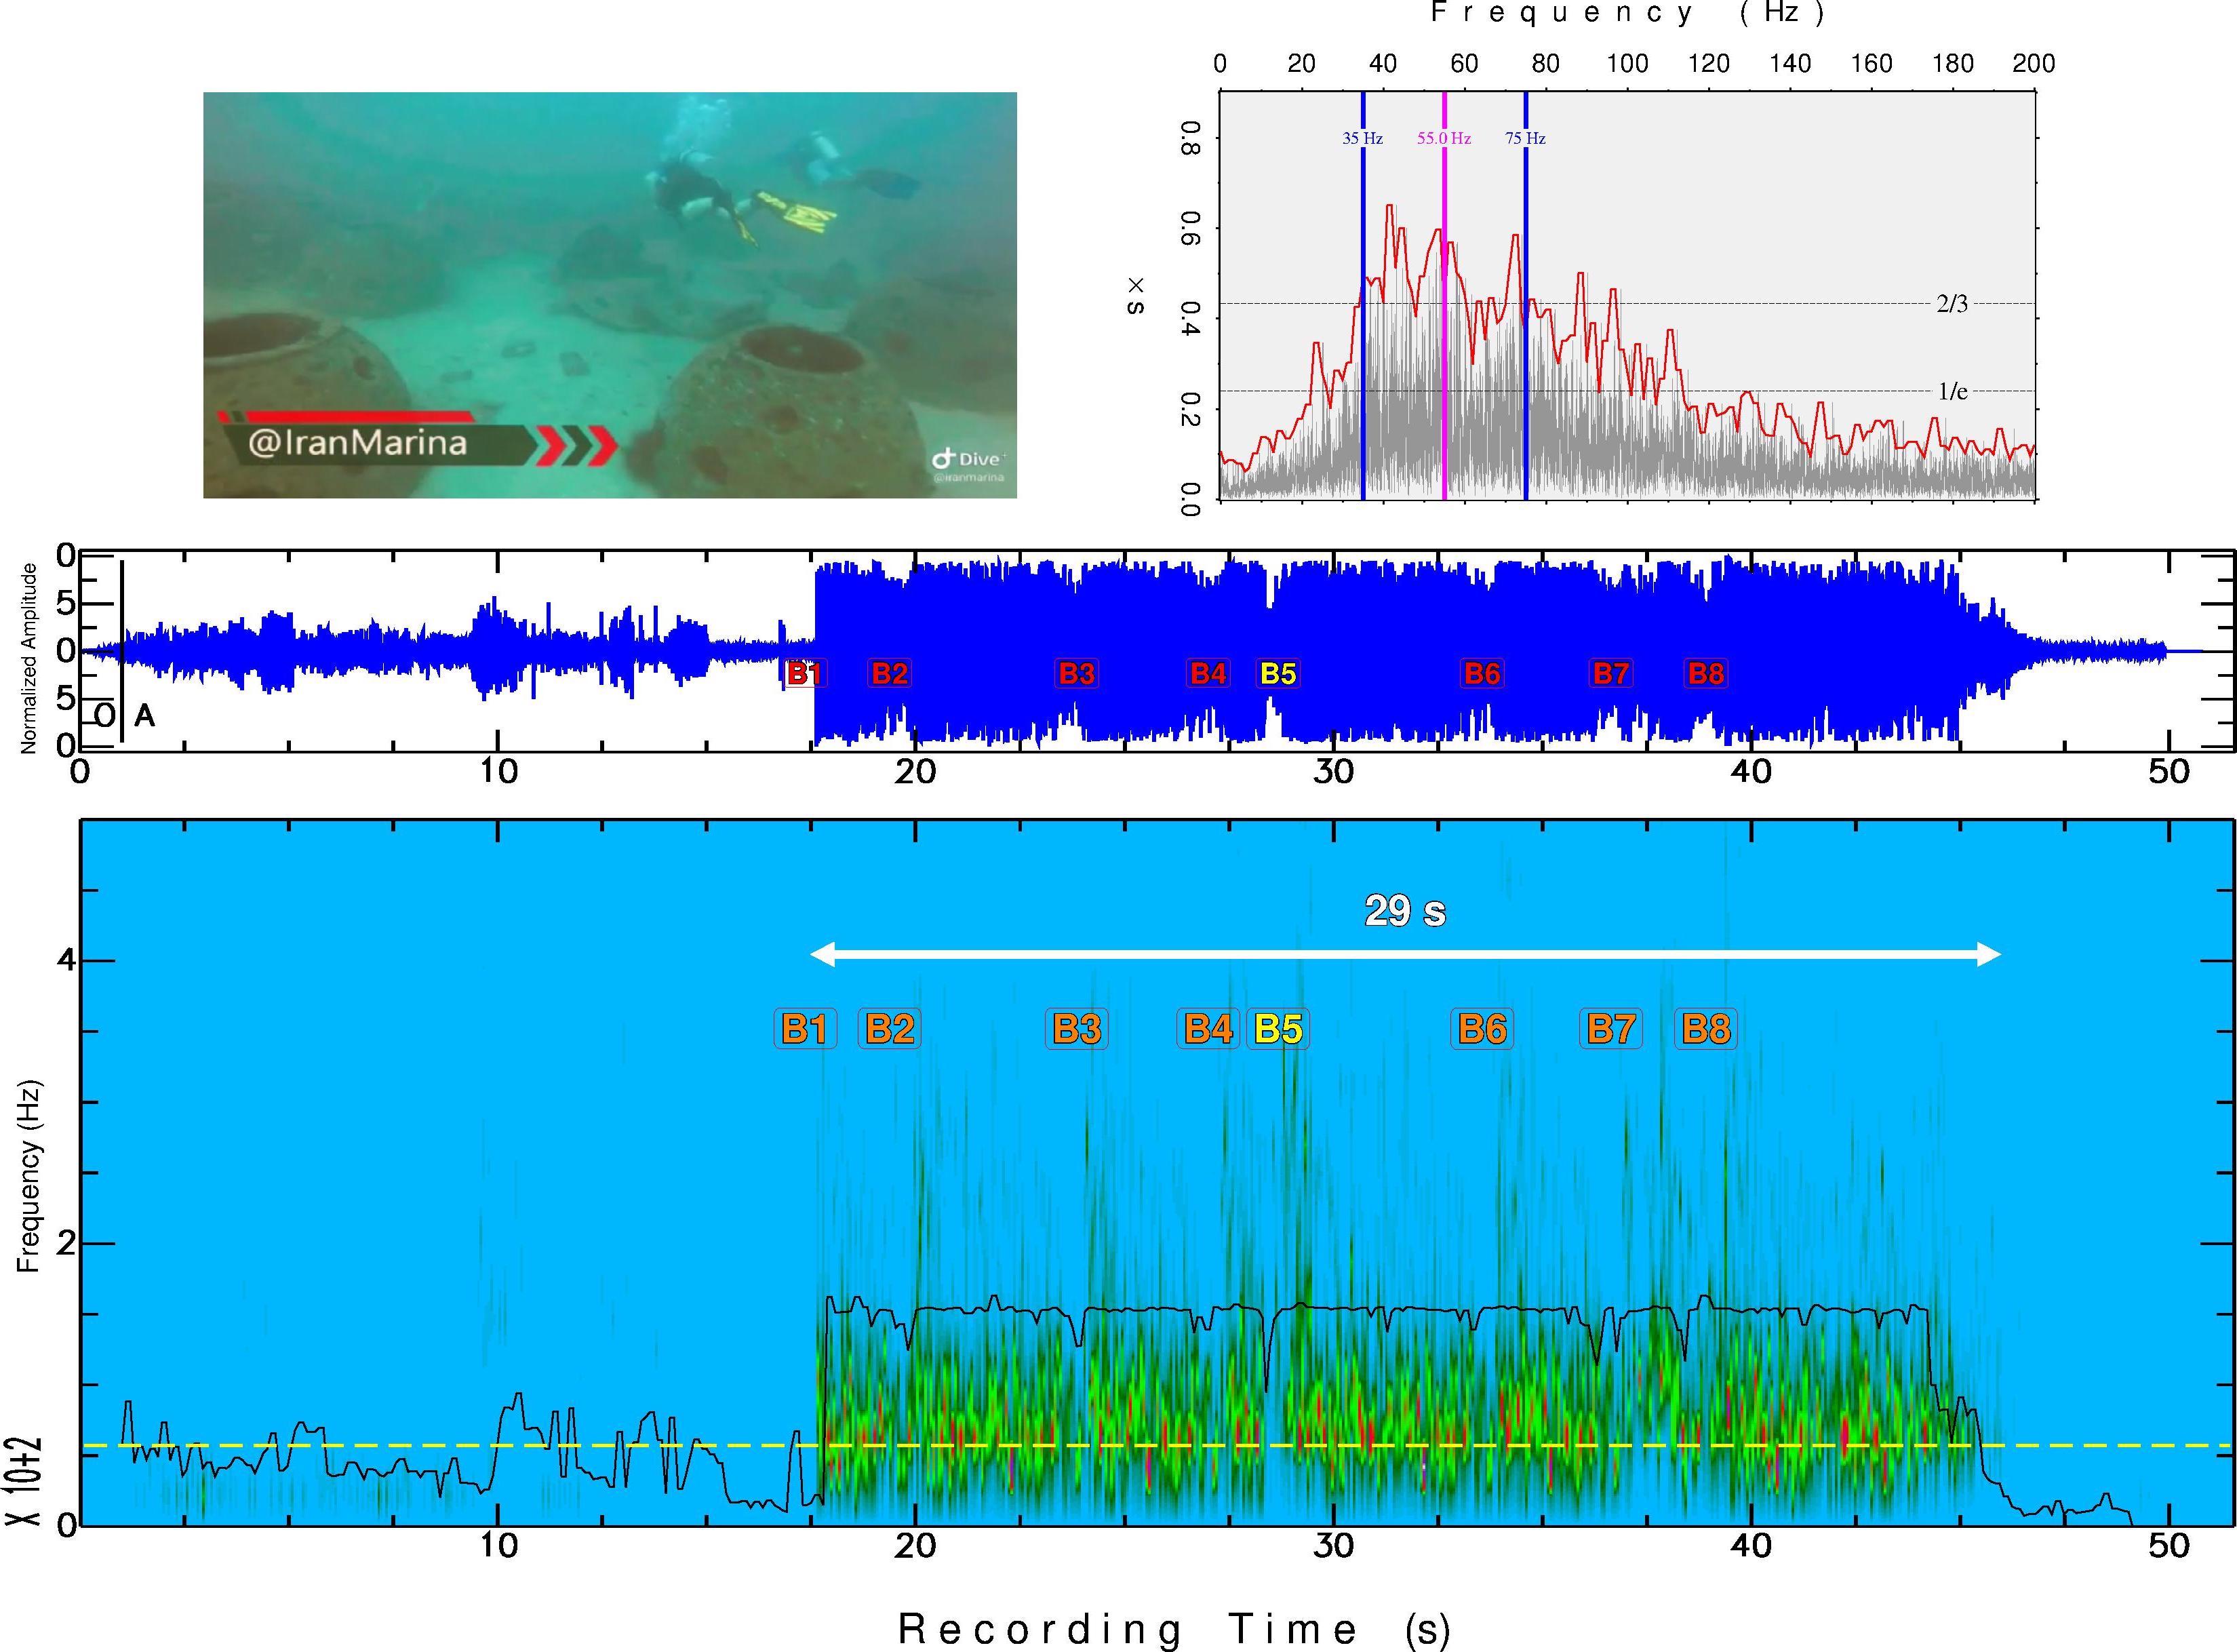 Figure 2 from the article Solving a Seismic Mystery With the Audio From a Diver's Camera: A Case of Shallow Water T-Waves in the Persian Gulf by Drs. Amir Salaree, Zach Spica nad Yihe Huang